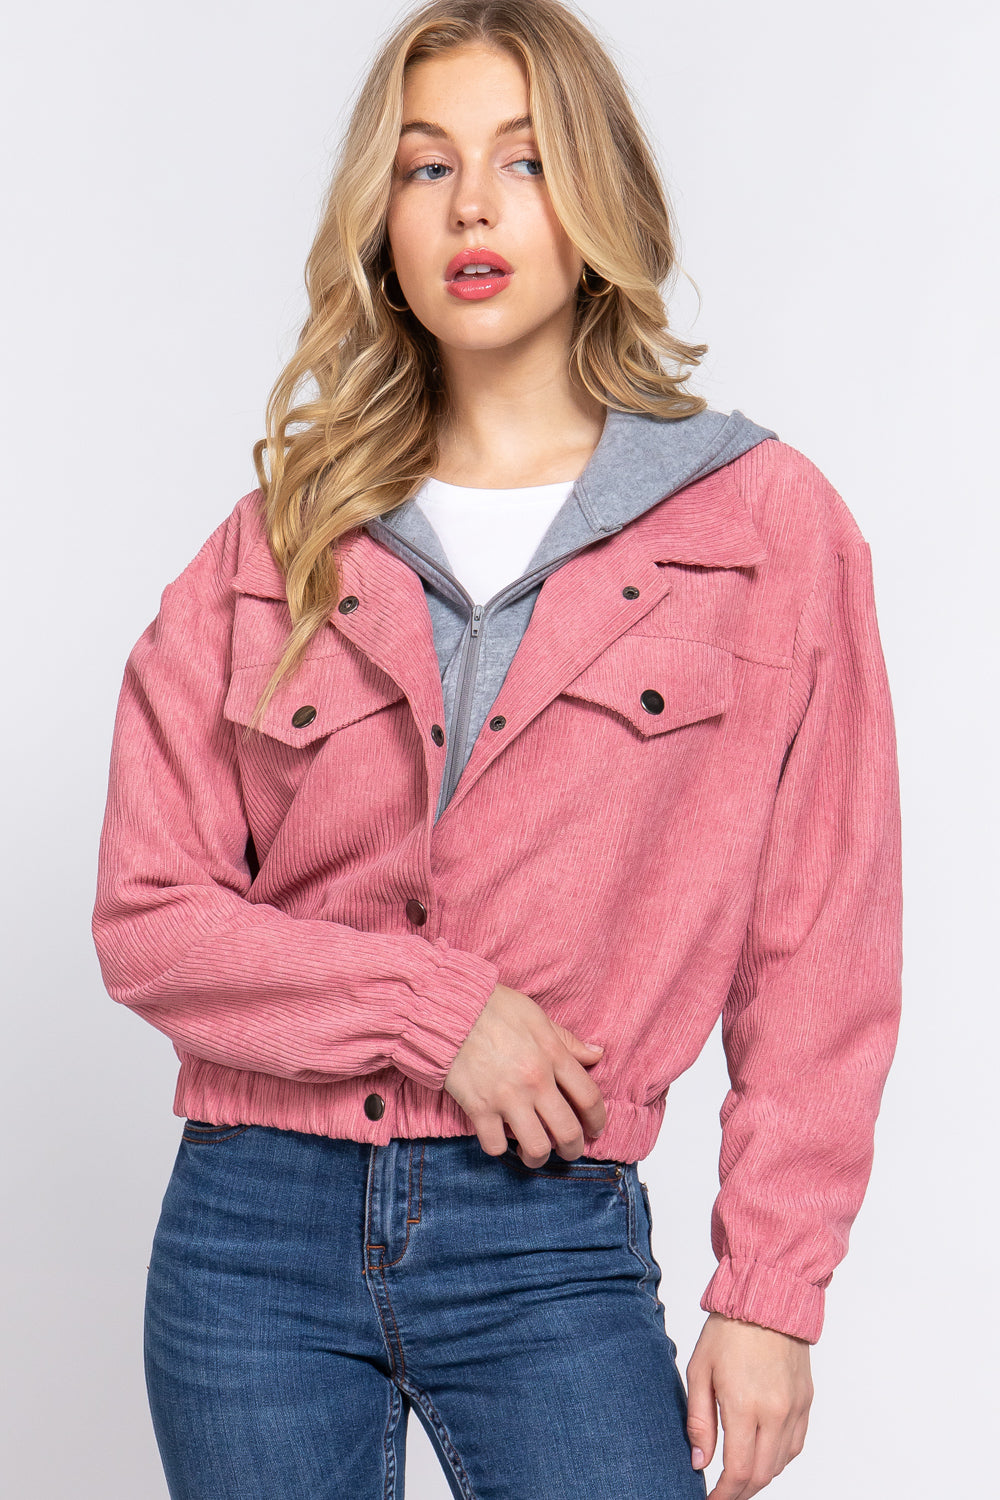 Pink Long Slv Hooded Corduroy Jacket - 5 colors - women's jacket at TFC&H Co.